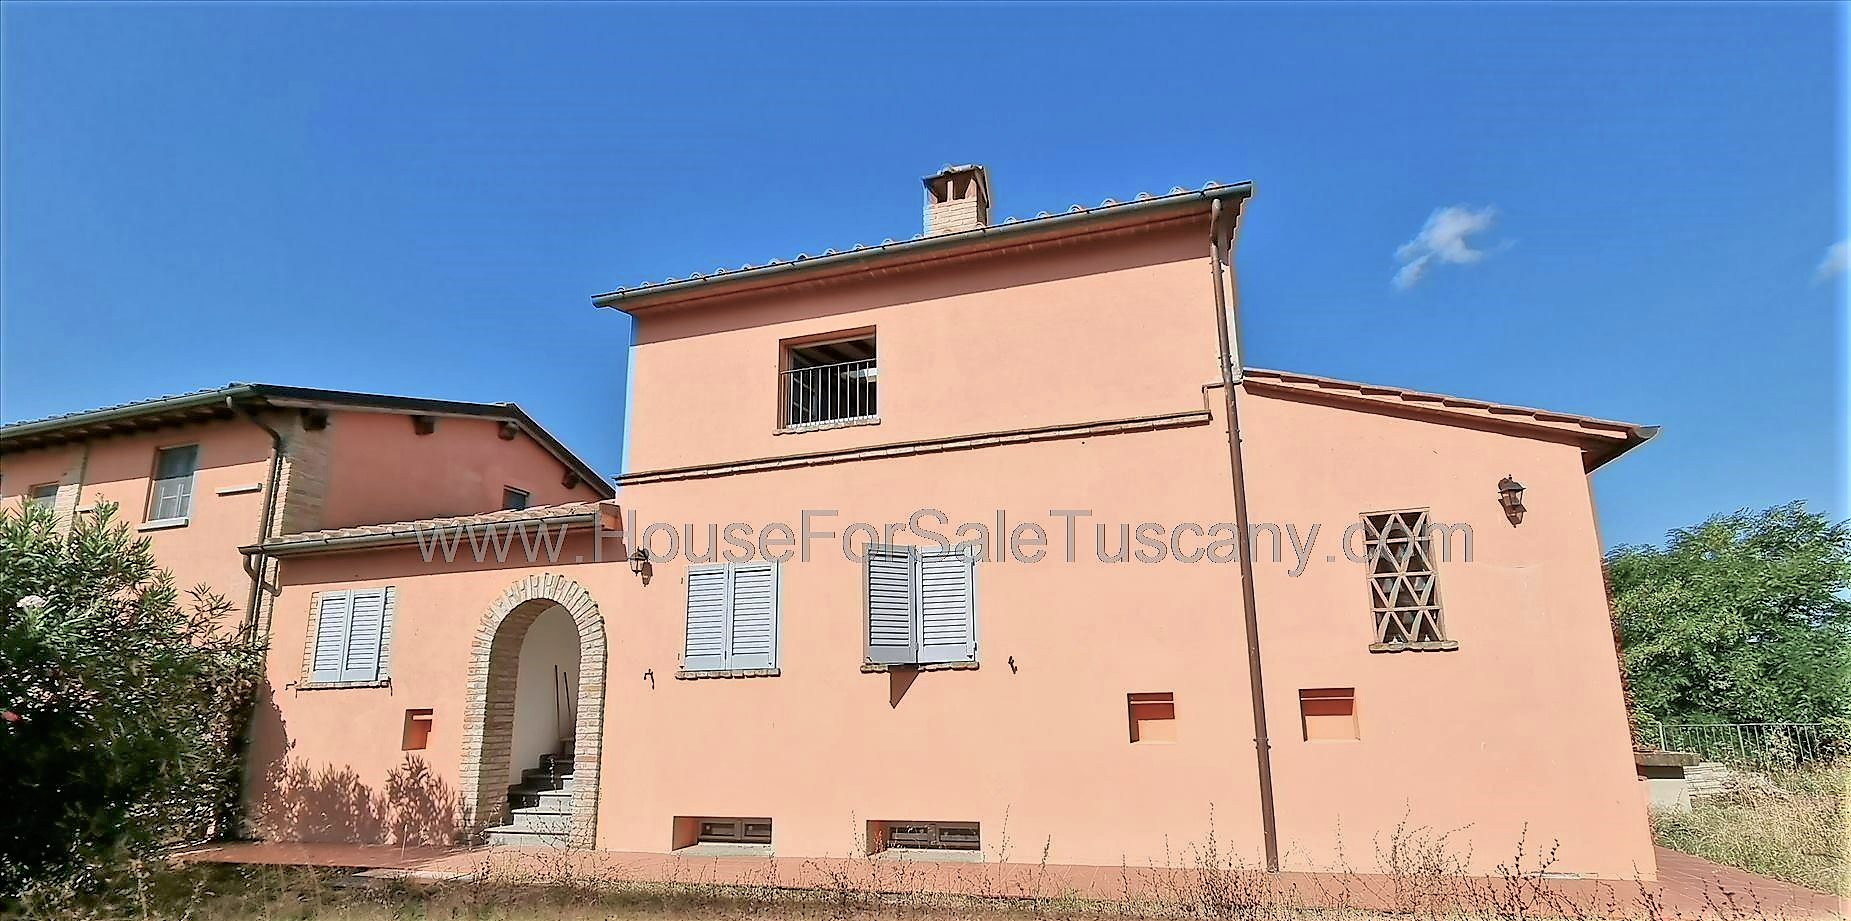 House in a Borgo - with all services in Tuscany for sale